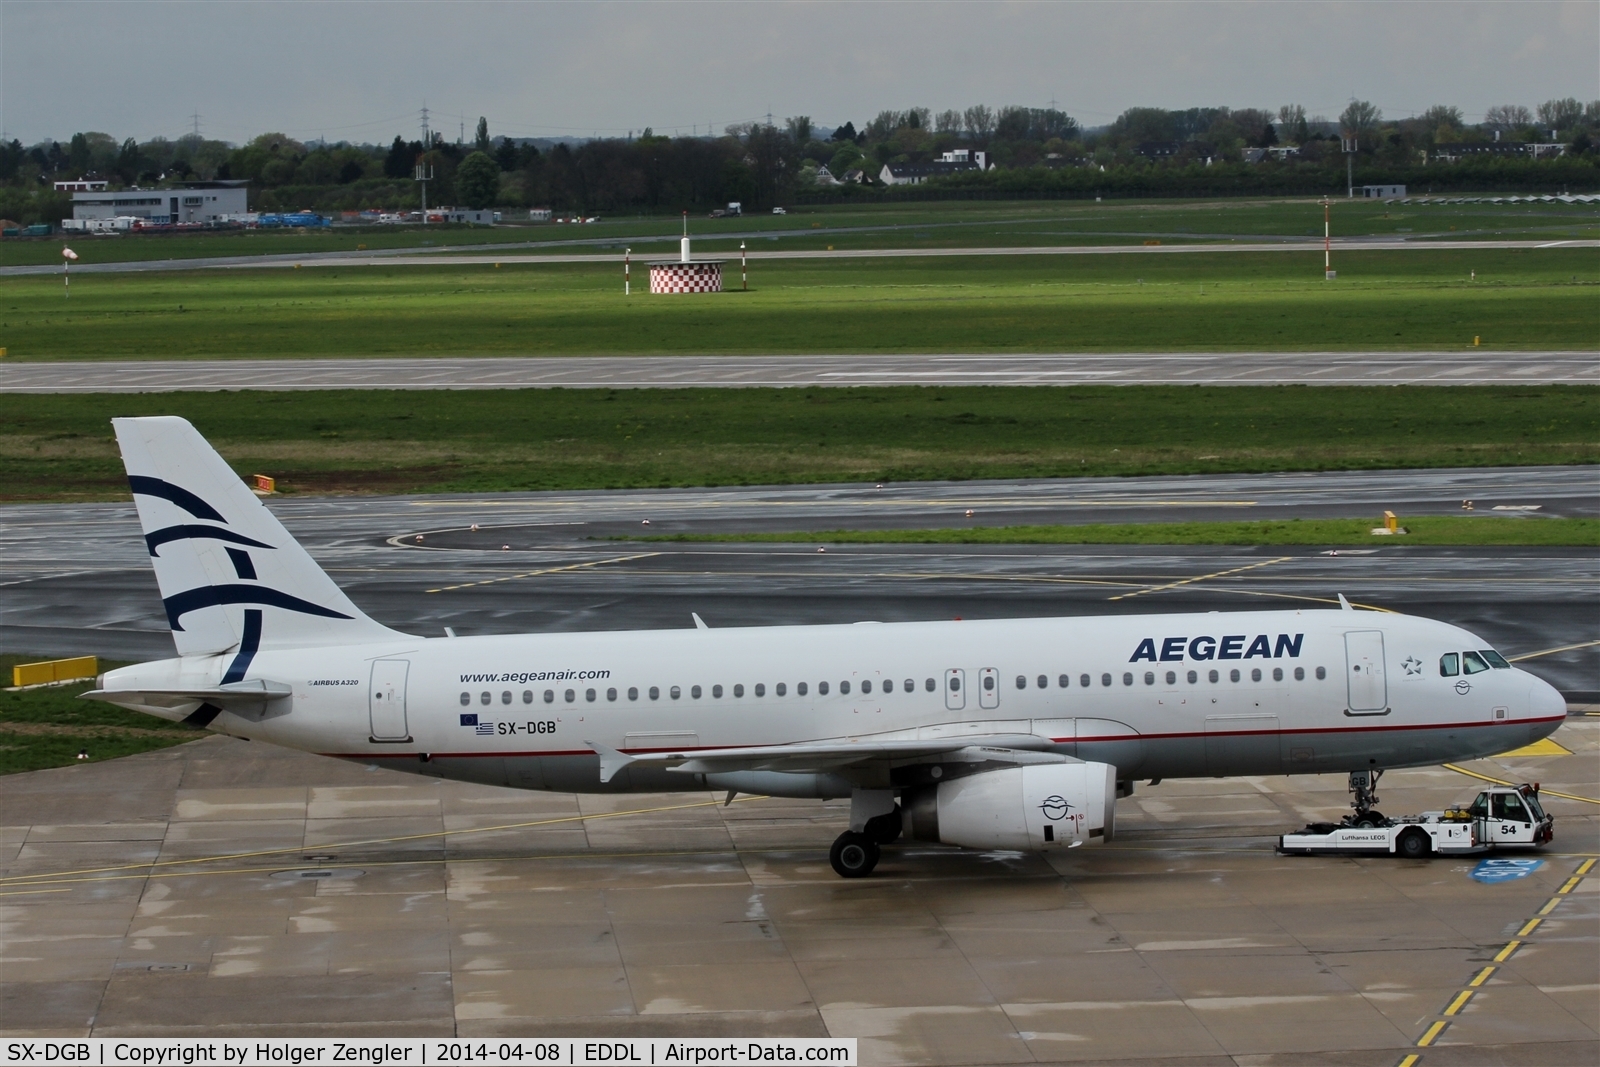 SX-DGB, 2009 Airbus A320-232 C/N 4165, Ready for taxi and return to Athens....